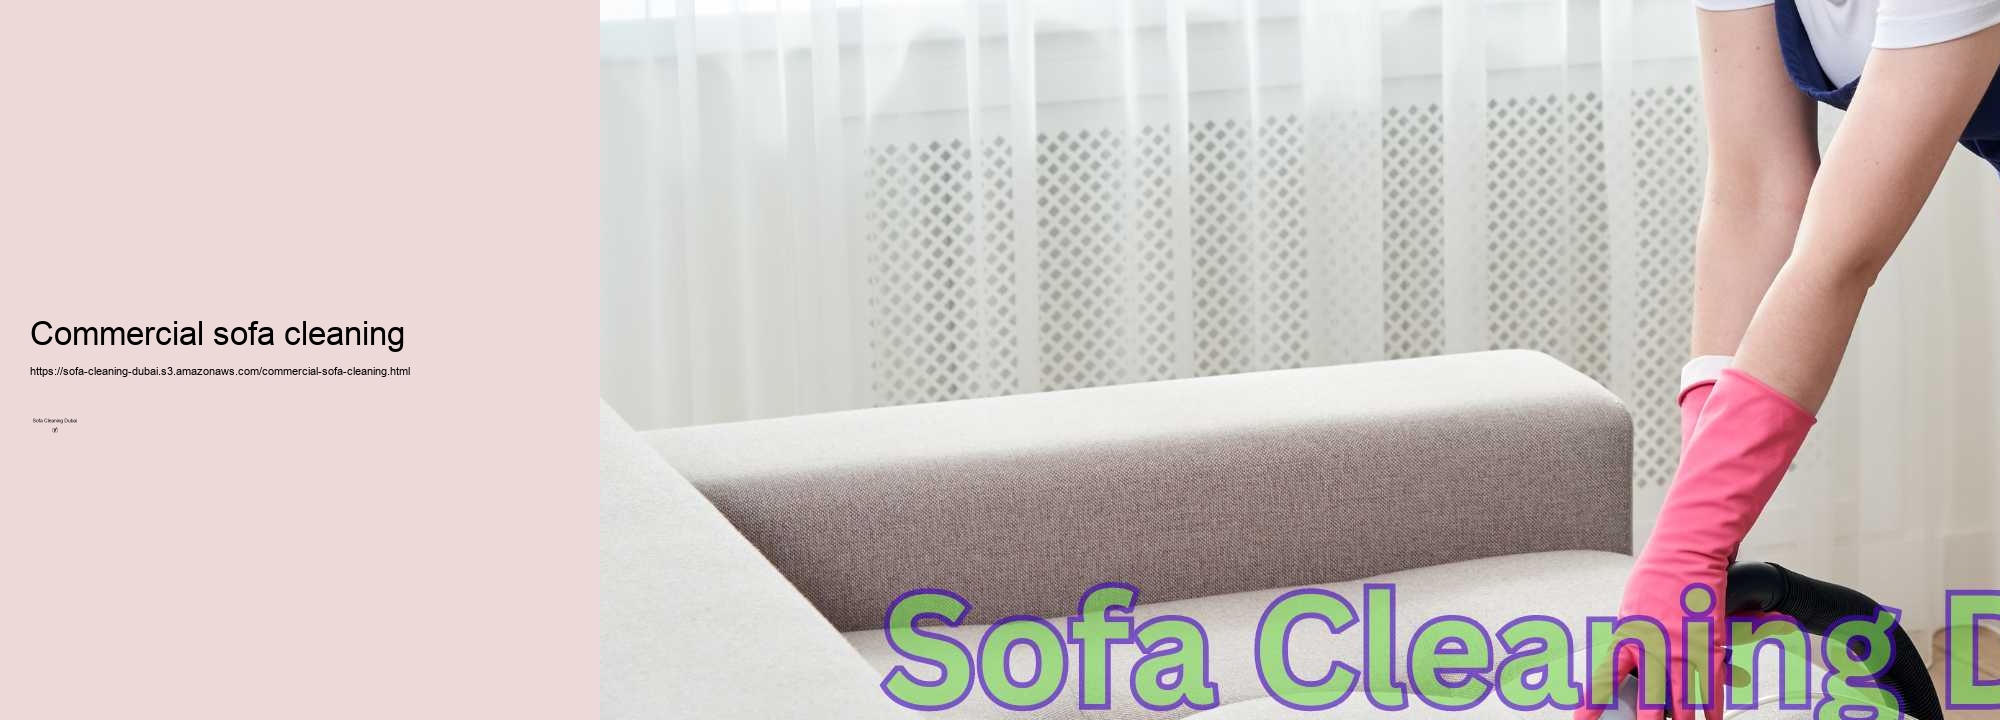 Commercial sofa cleaning